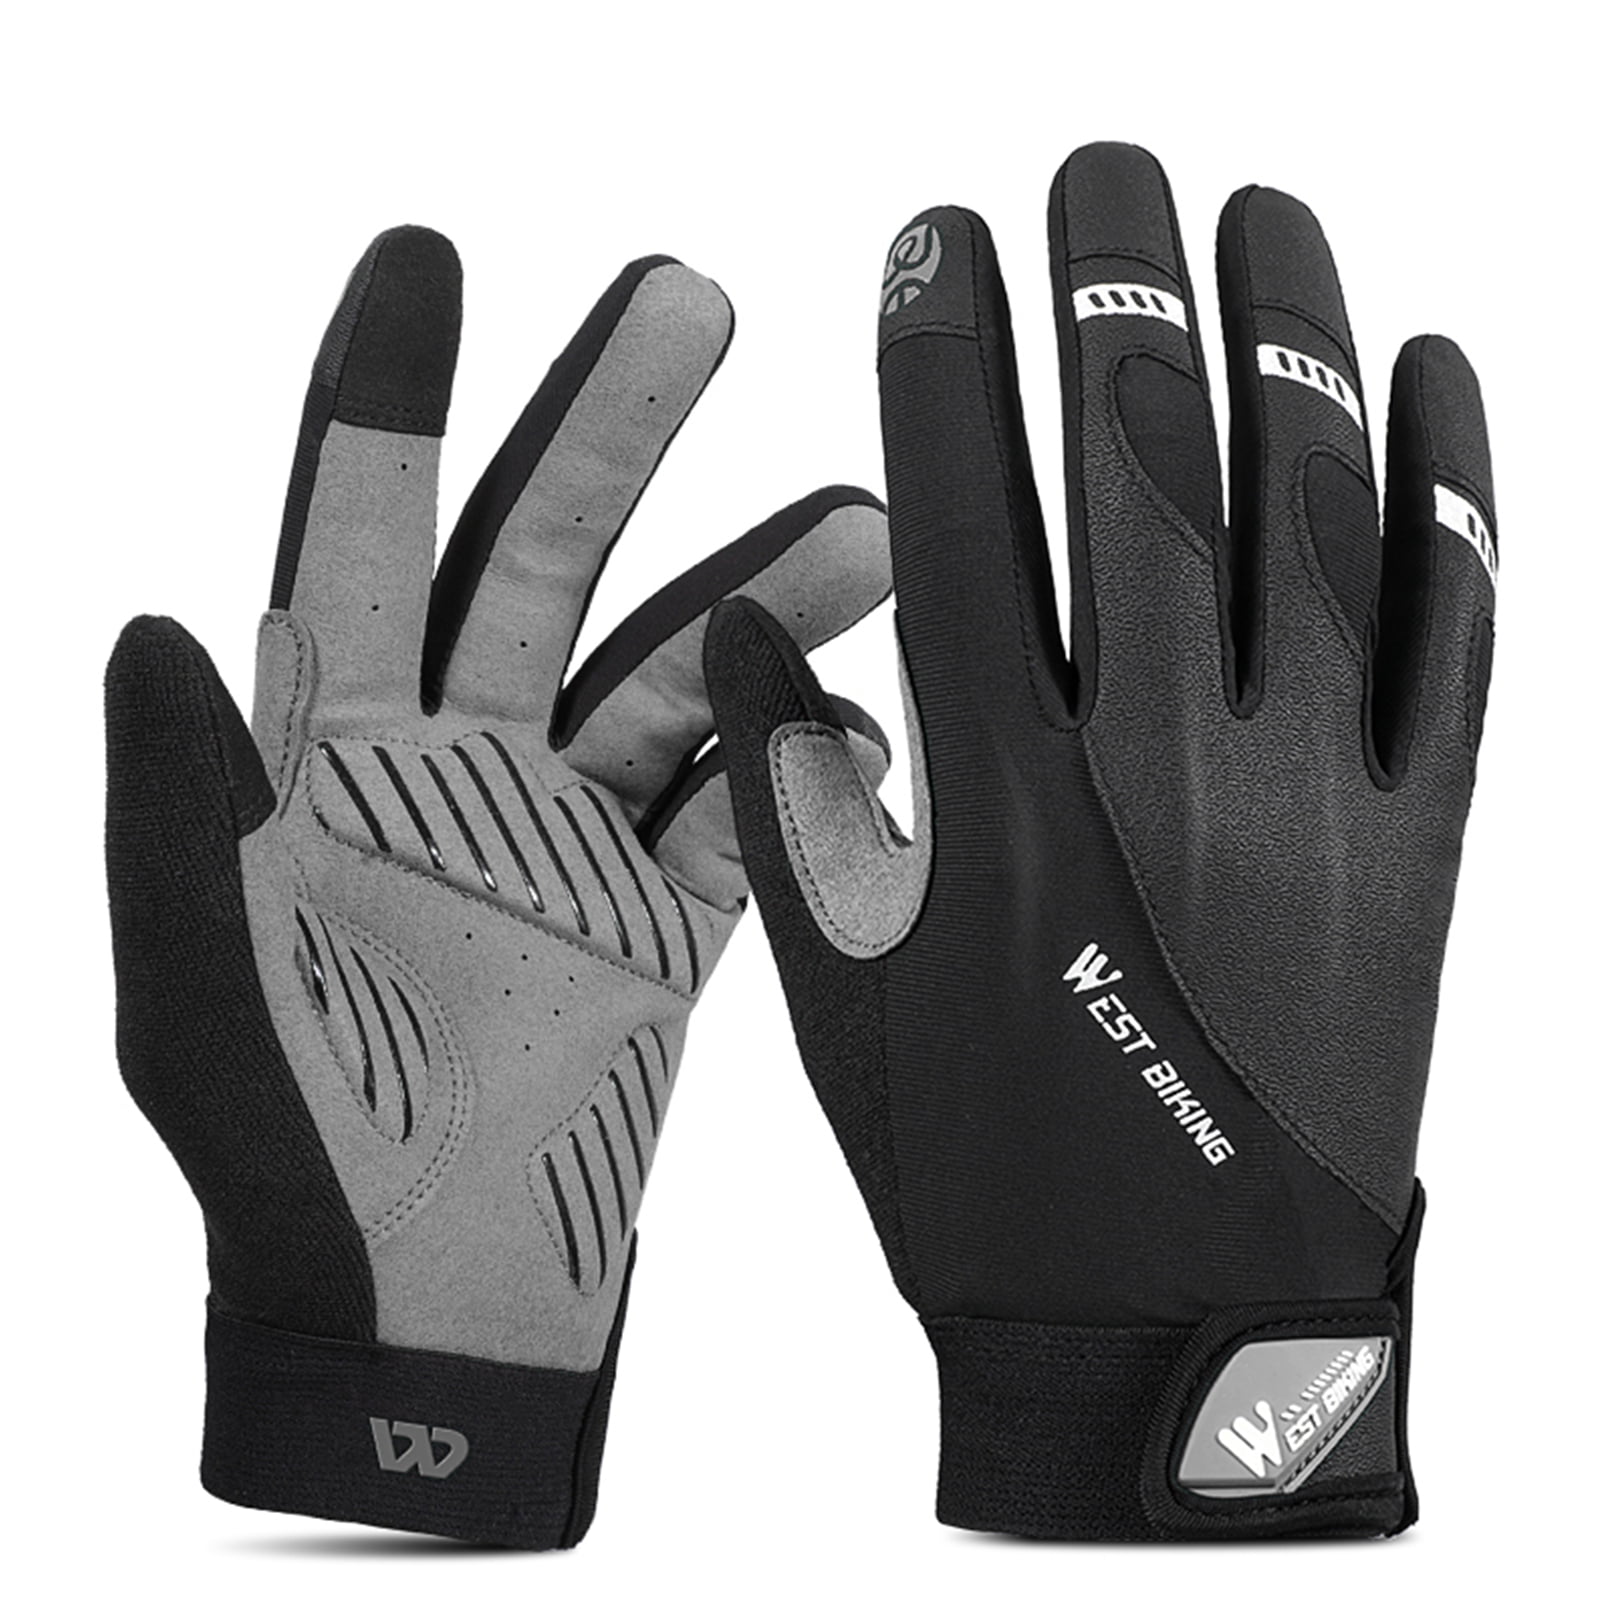 Gloves Outdoor Cycling Bicycle Glove with Anti-slip Screen-touchable Finger Bike 